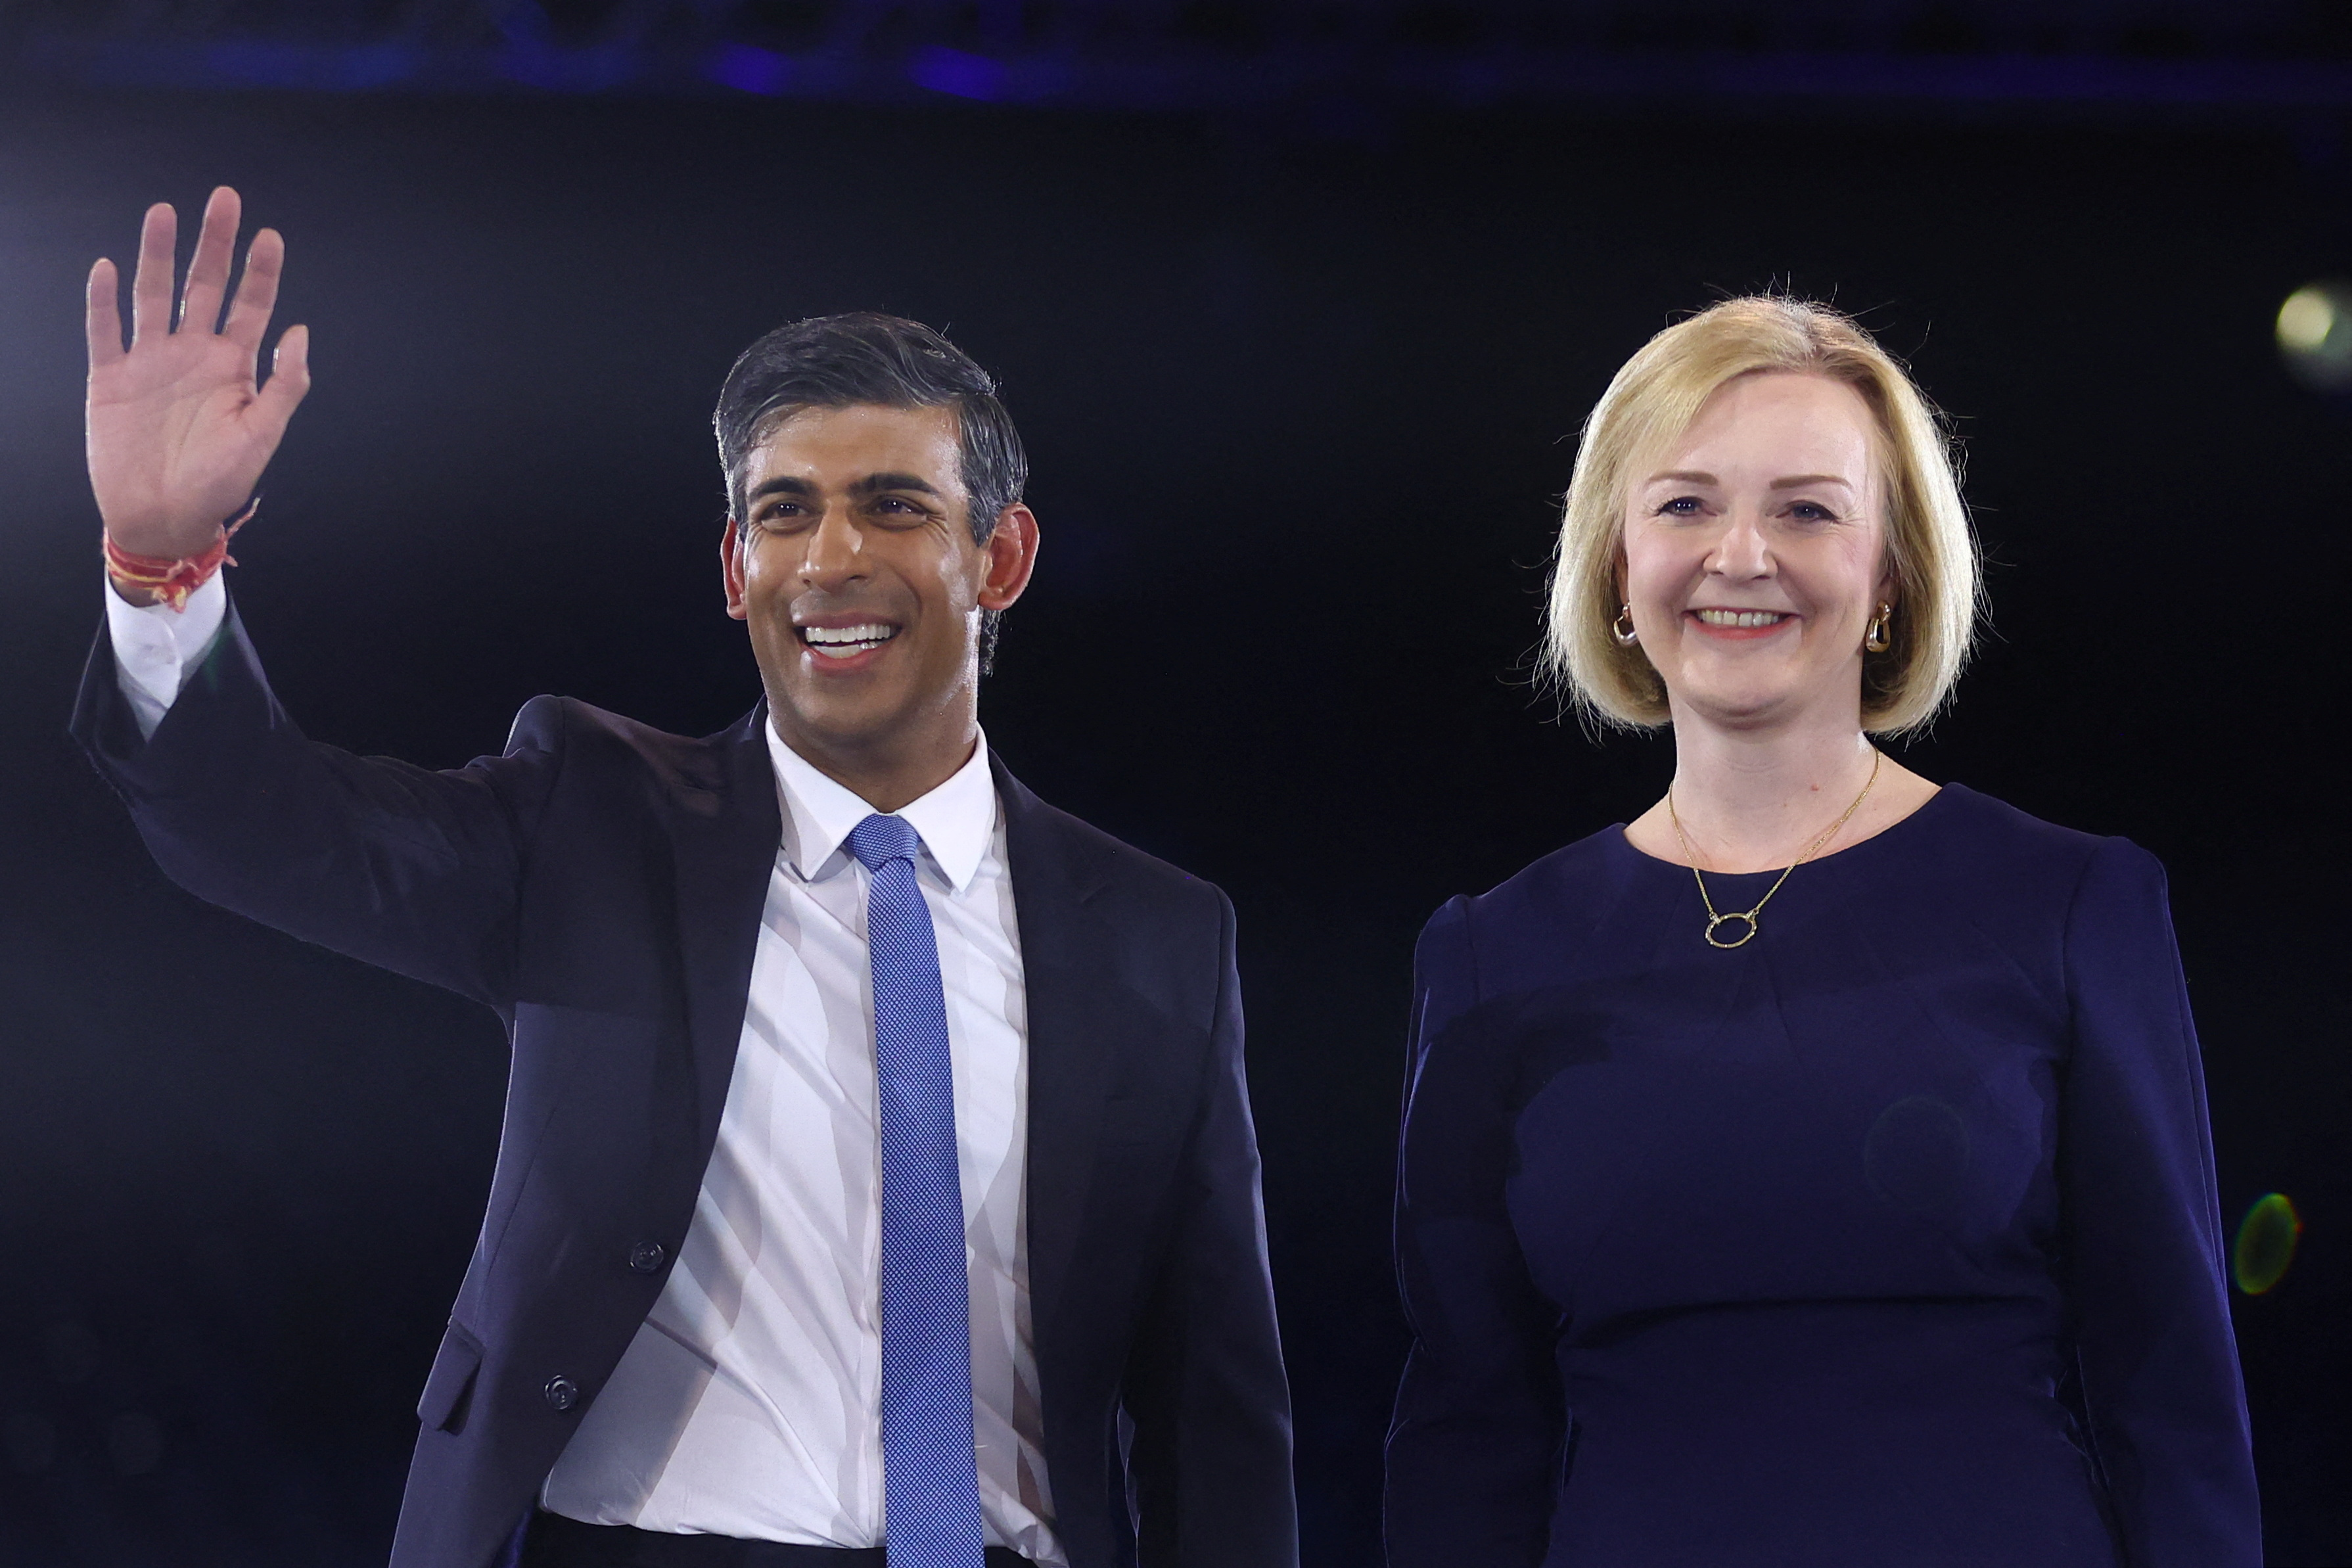 Foreign Secretary Liz Truss And Former Finance Minister Rishi Sunak Are In A Bid To Take Over The British Government.